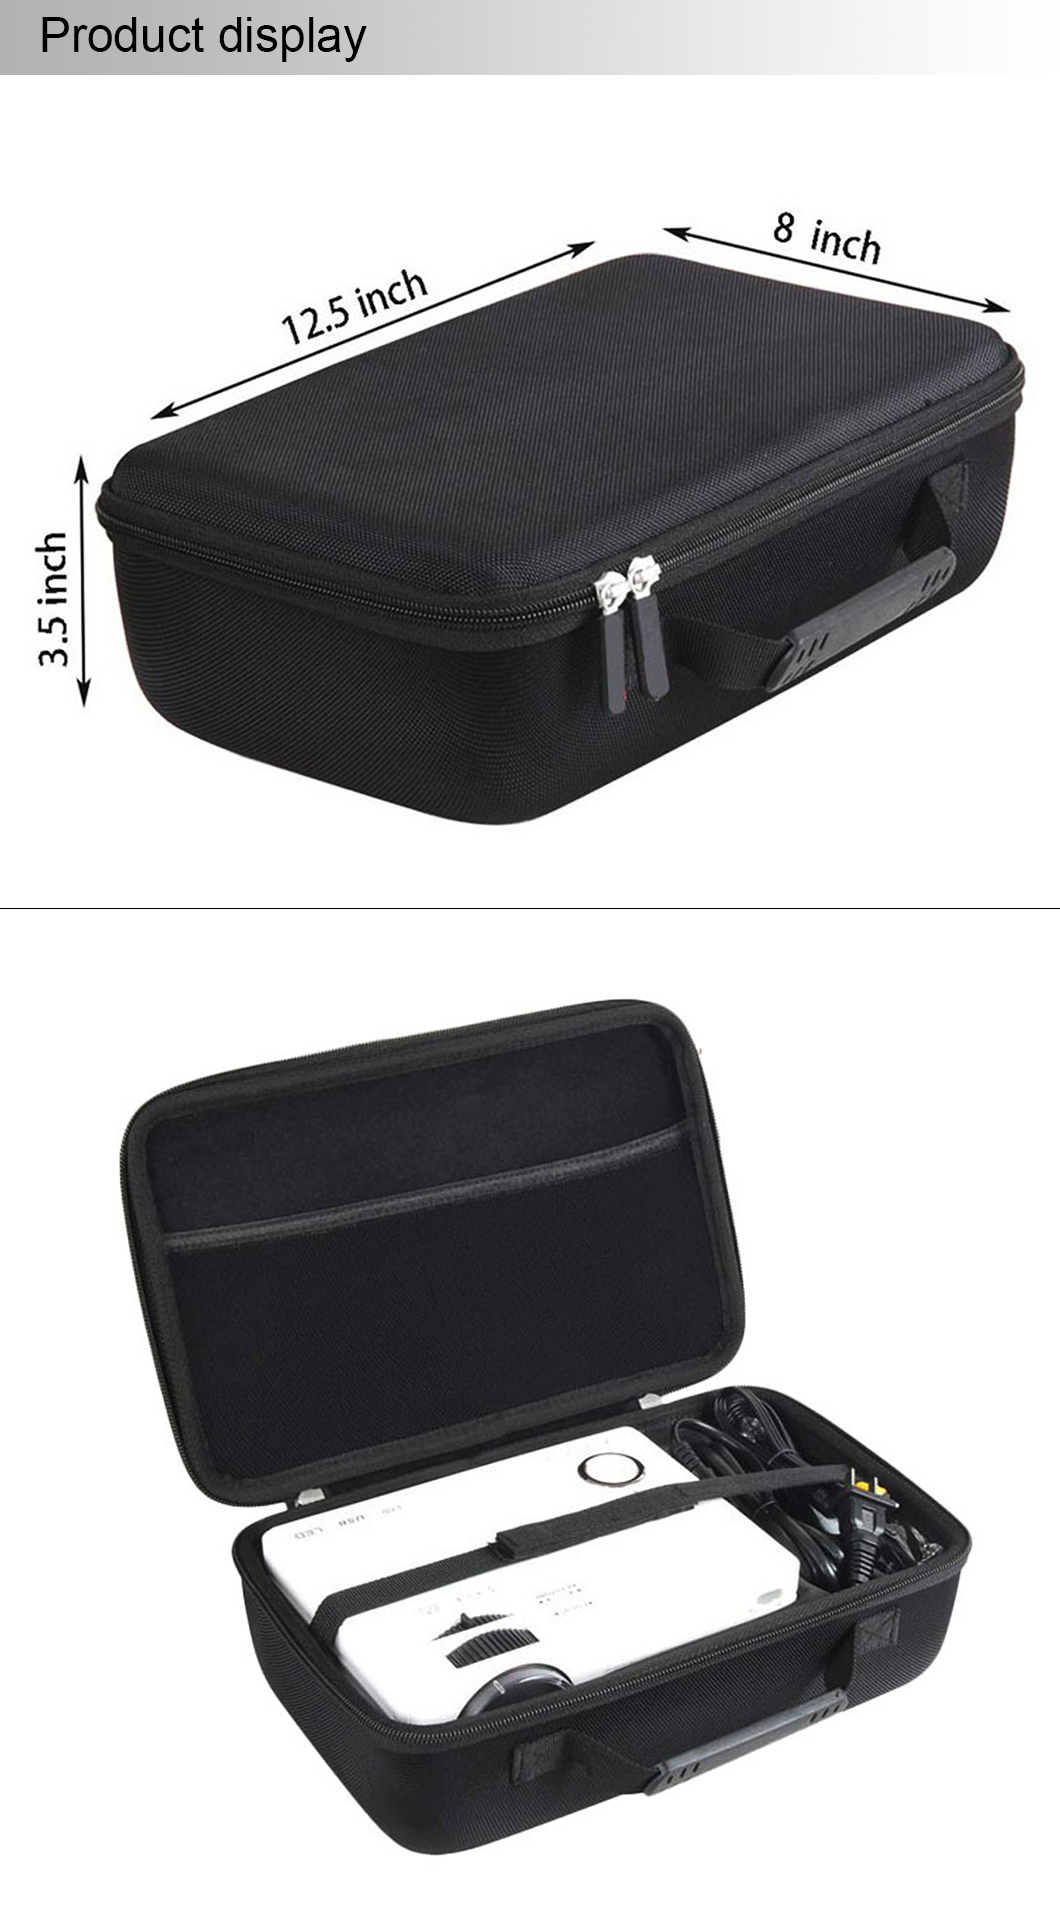 Portable Projector Case Hard EVA Travel Case for Video Projector and Accessories(图1)